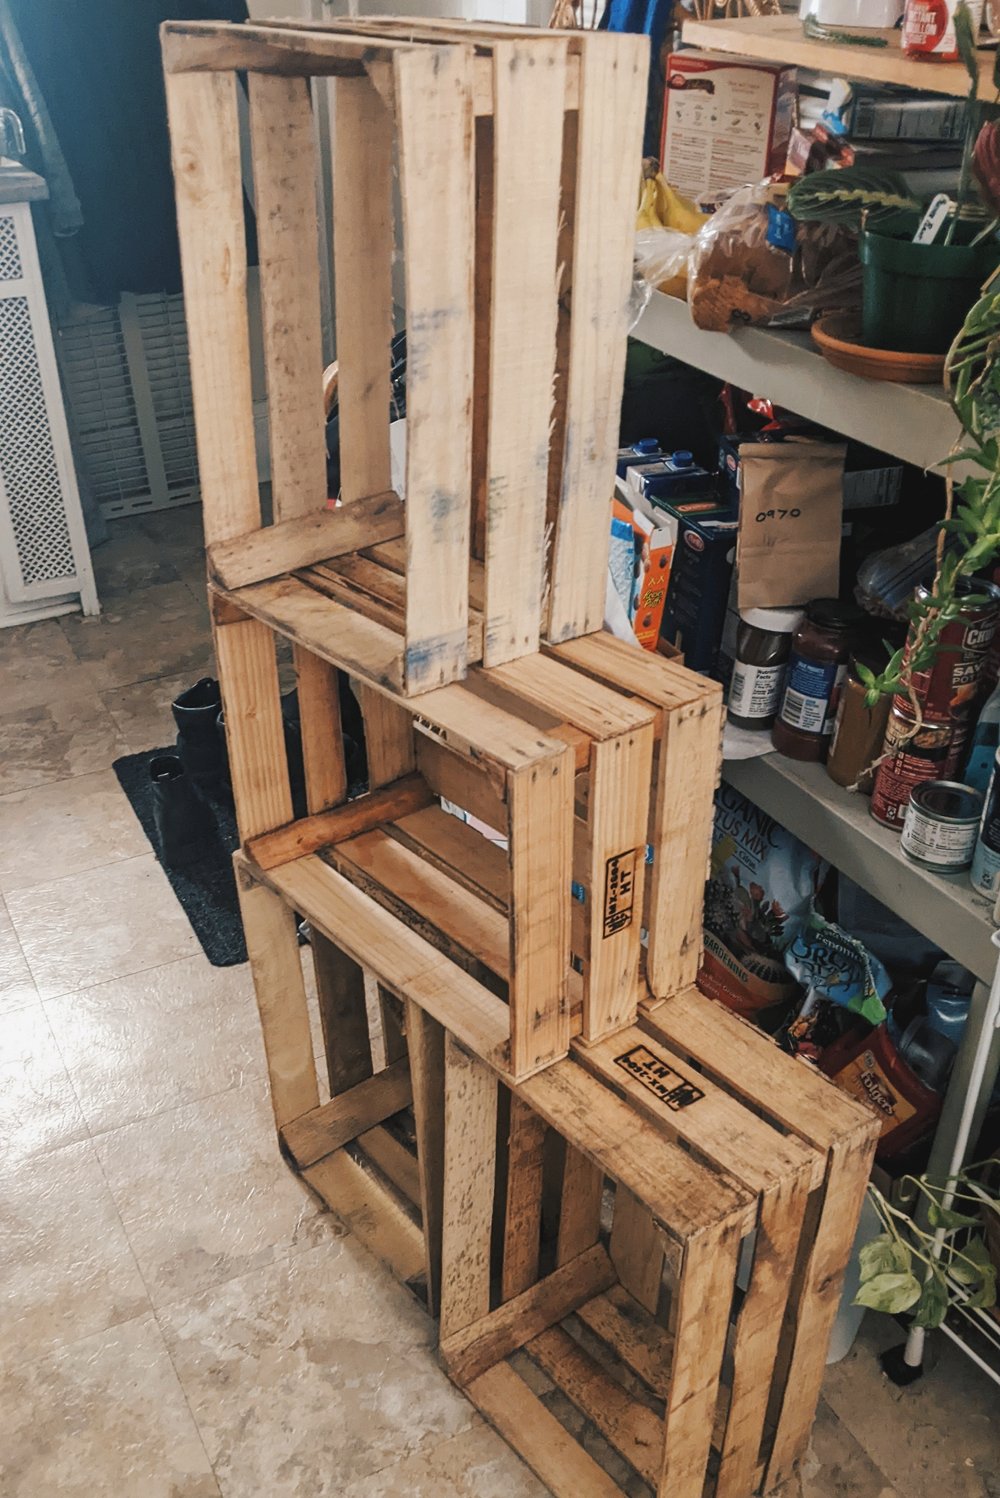 The produce crates before sanding